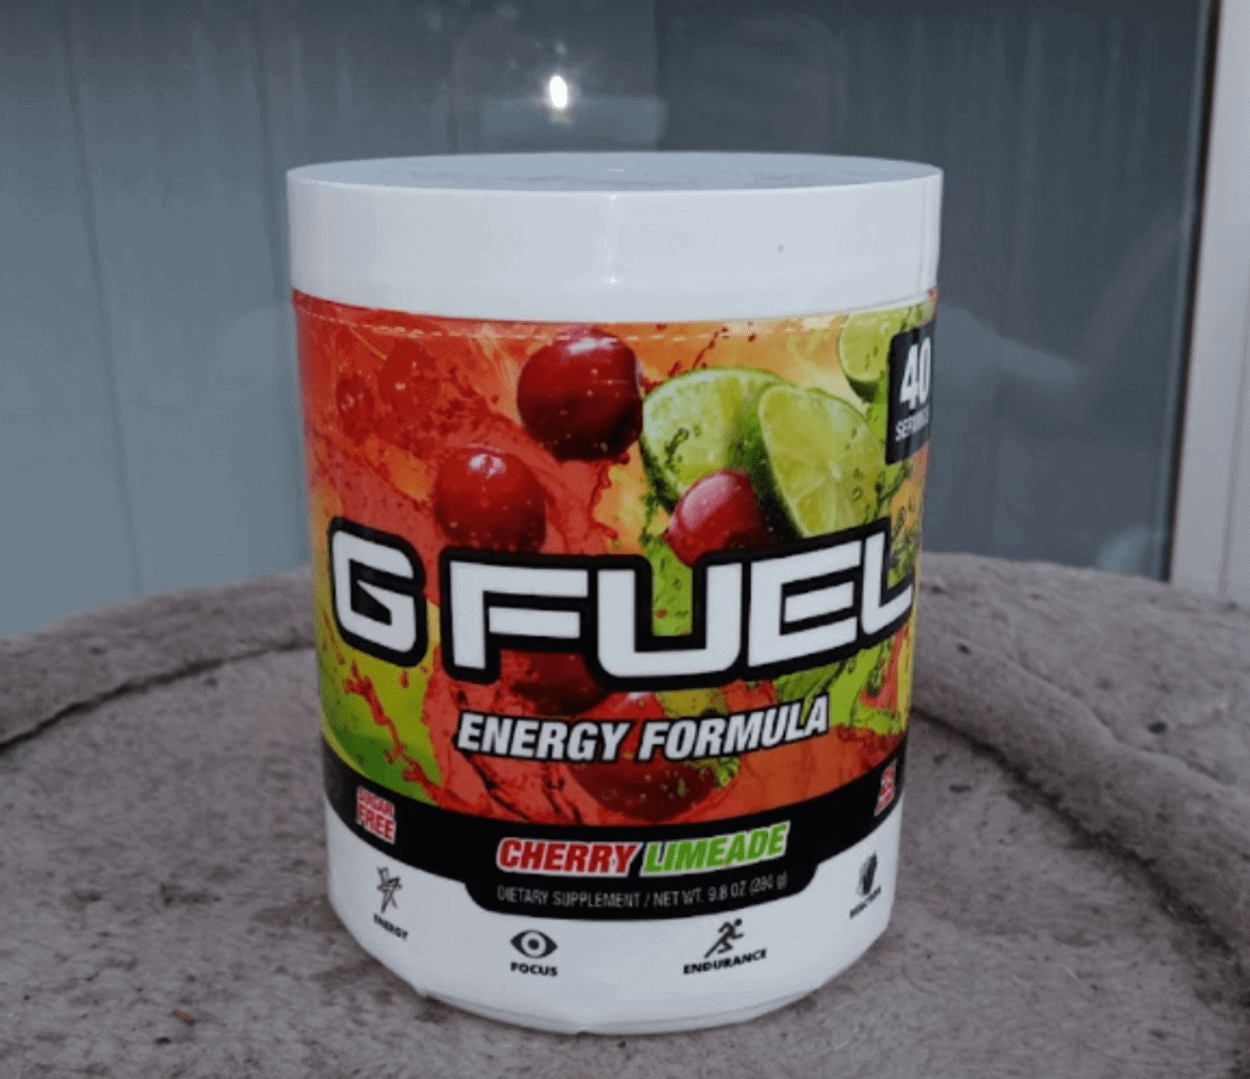 A tub of Cherry Limeade flavor of G Fuel Energy refreshment.